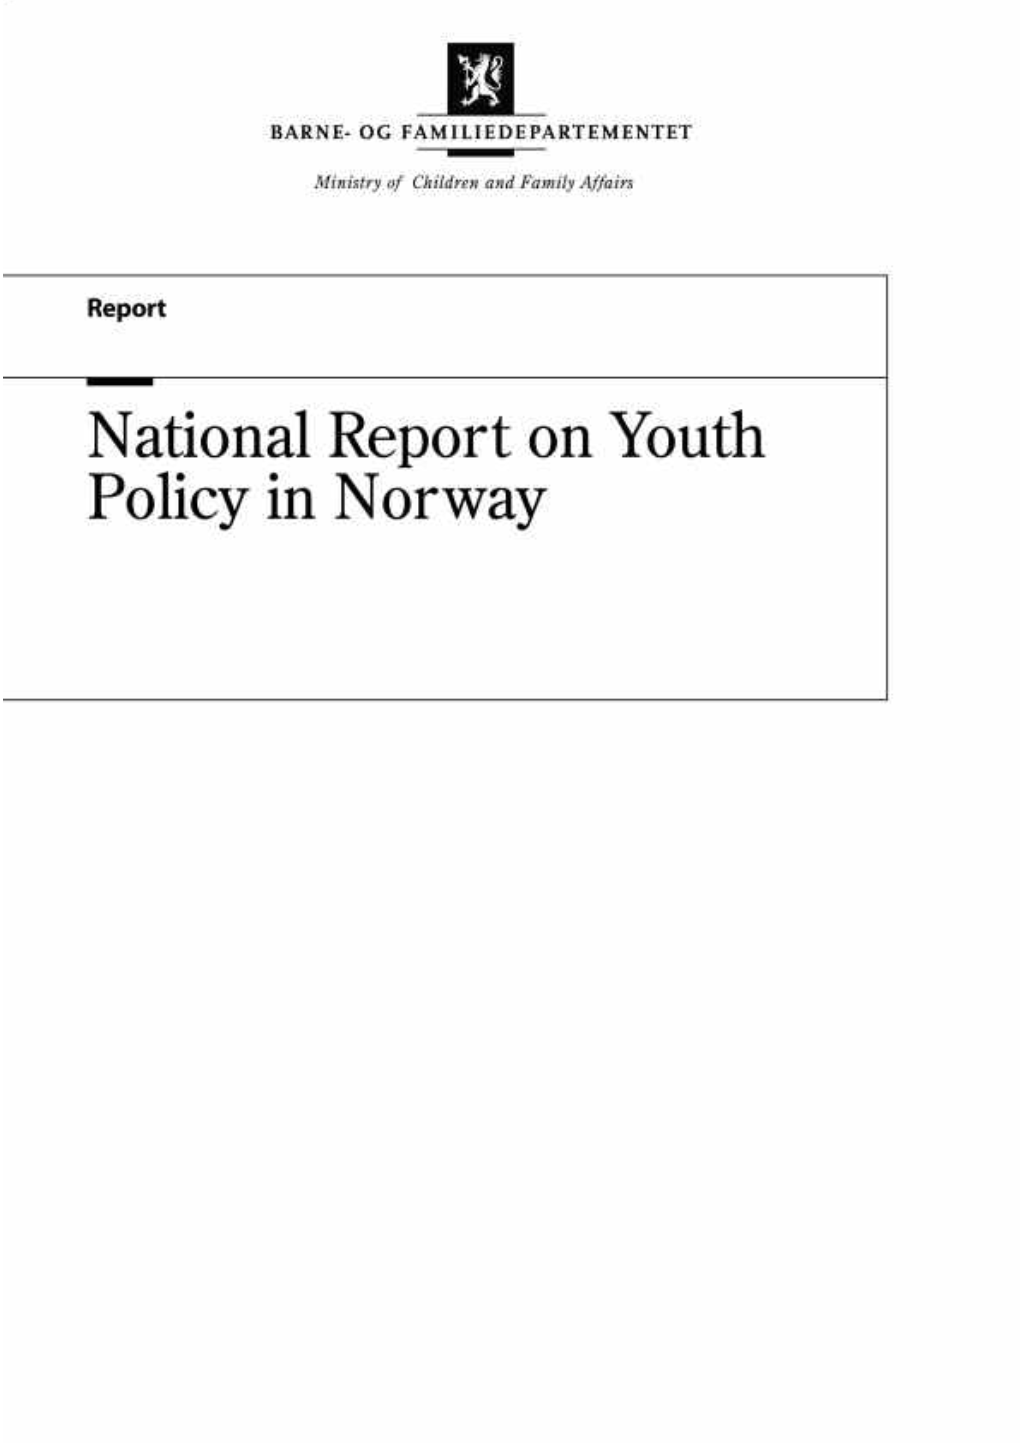 National Report on Youth Policy in Norway